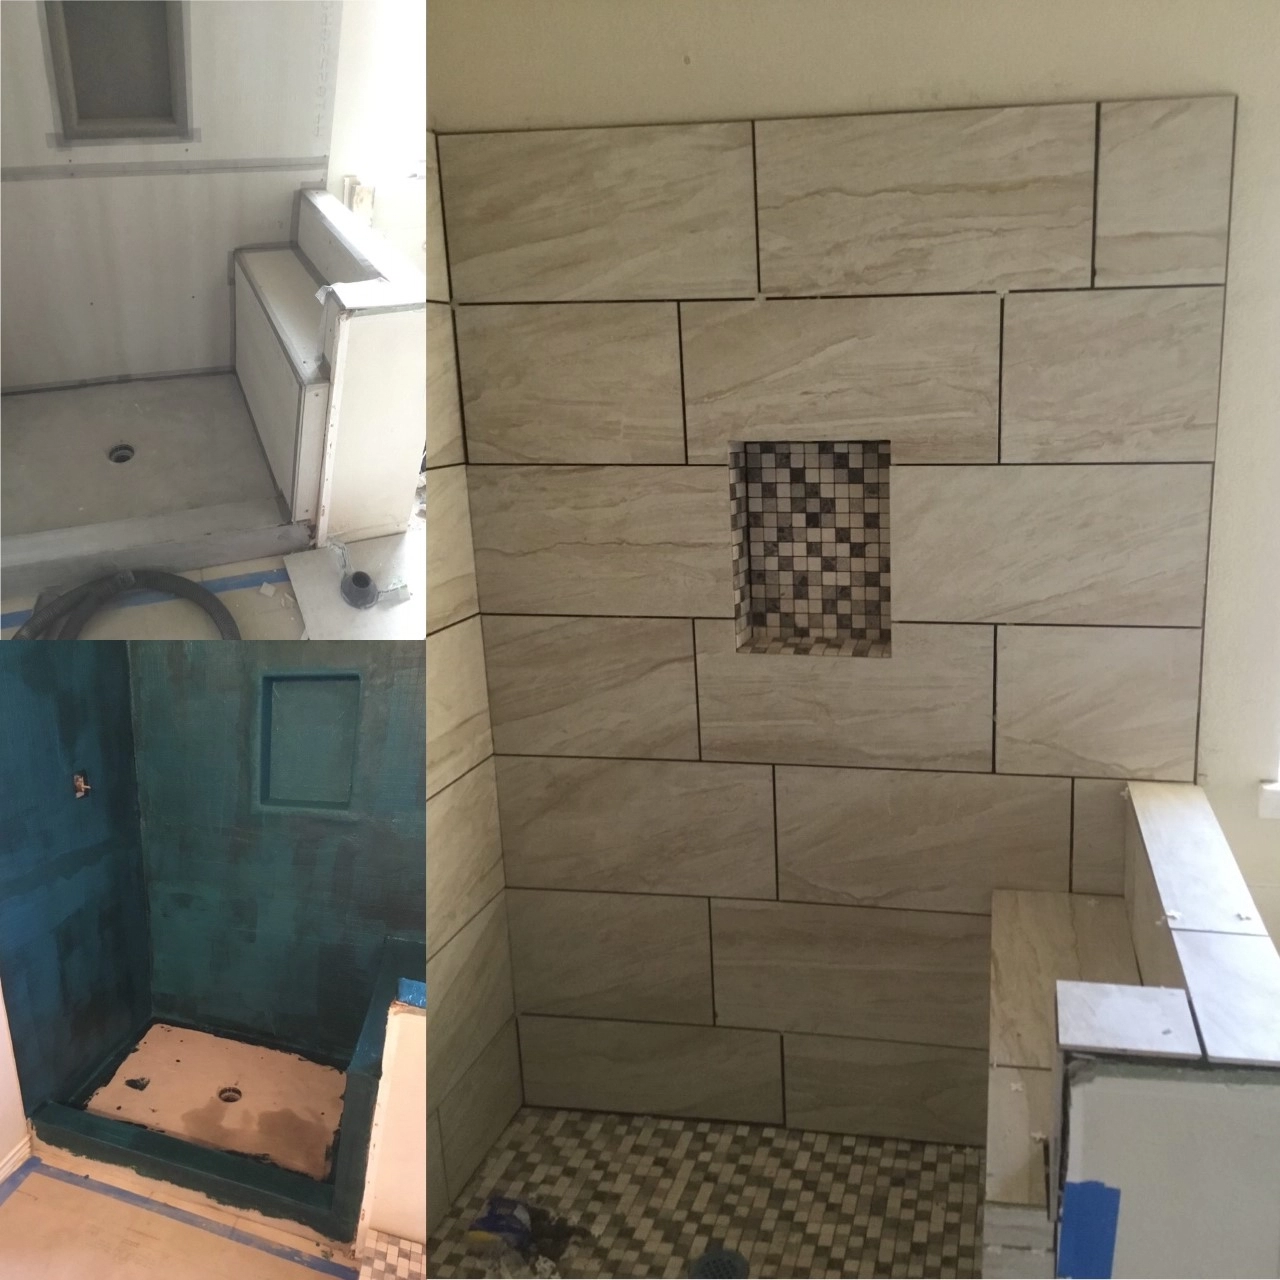 Multiple stages of a shower and bathroom remodeling project involving new tile installation for the bathroom's shower walls and floor.